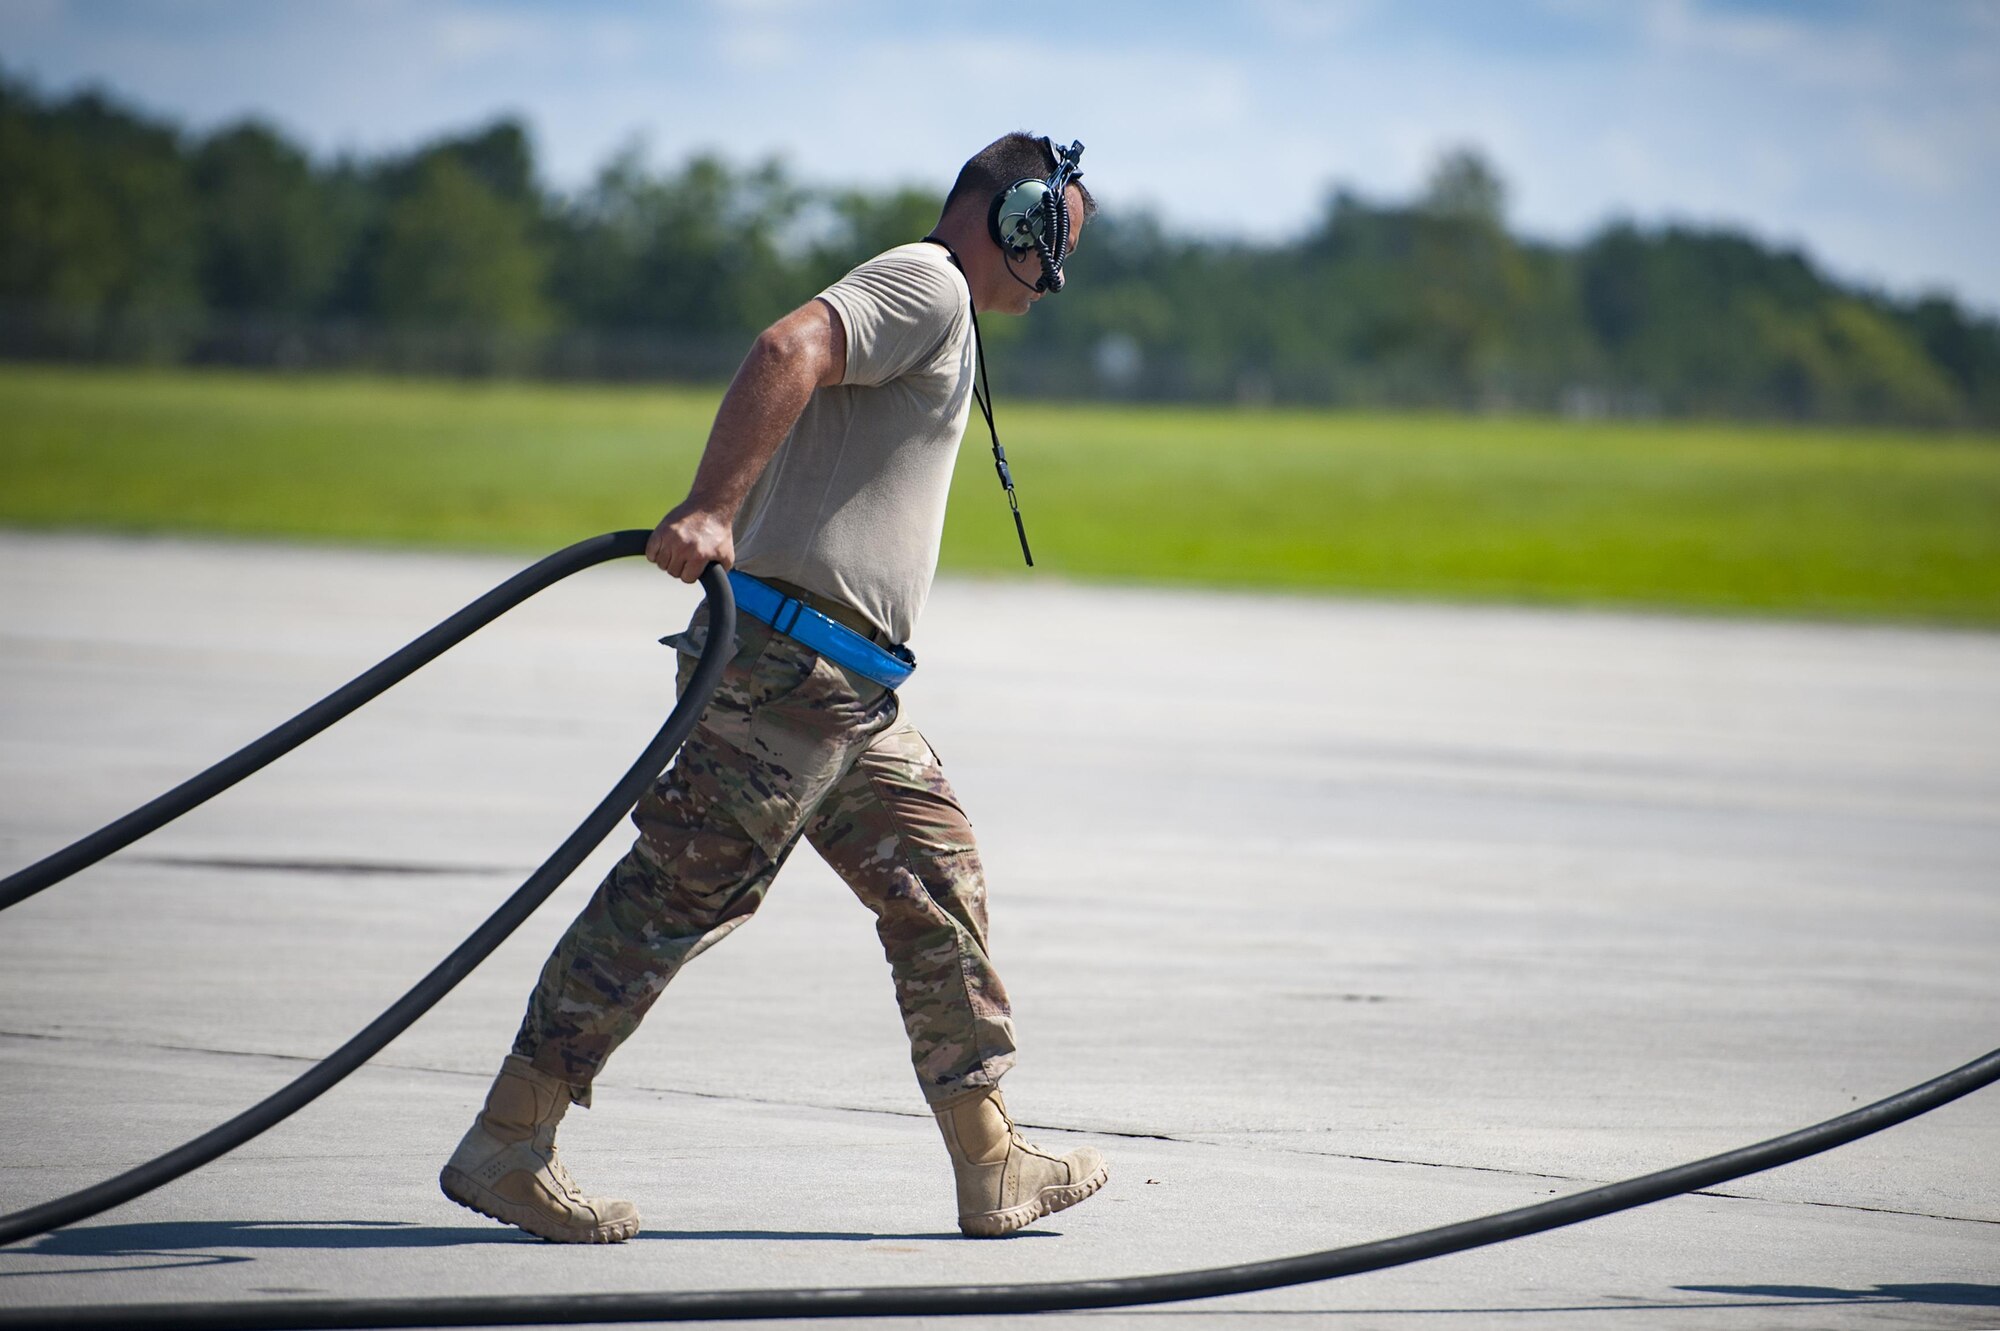 An Airman from the 71st Rescue Squadron Aircraft Maintenance Unit pulls a power cord prior to launching an HC-130J Combat King II, Aug. 17, 2017, at Moody Air Force Base, Ga. Maintainers perform various tasks prior to take-off such as pre-flight inspections, removing plugs and covers, repairing any problems found during crew pre-flight checks and marshalling the aircraft. (U.S. Air Force photo by Airman 1st Class Lauren M. Sprunk)